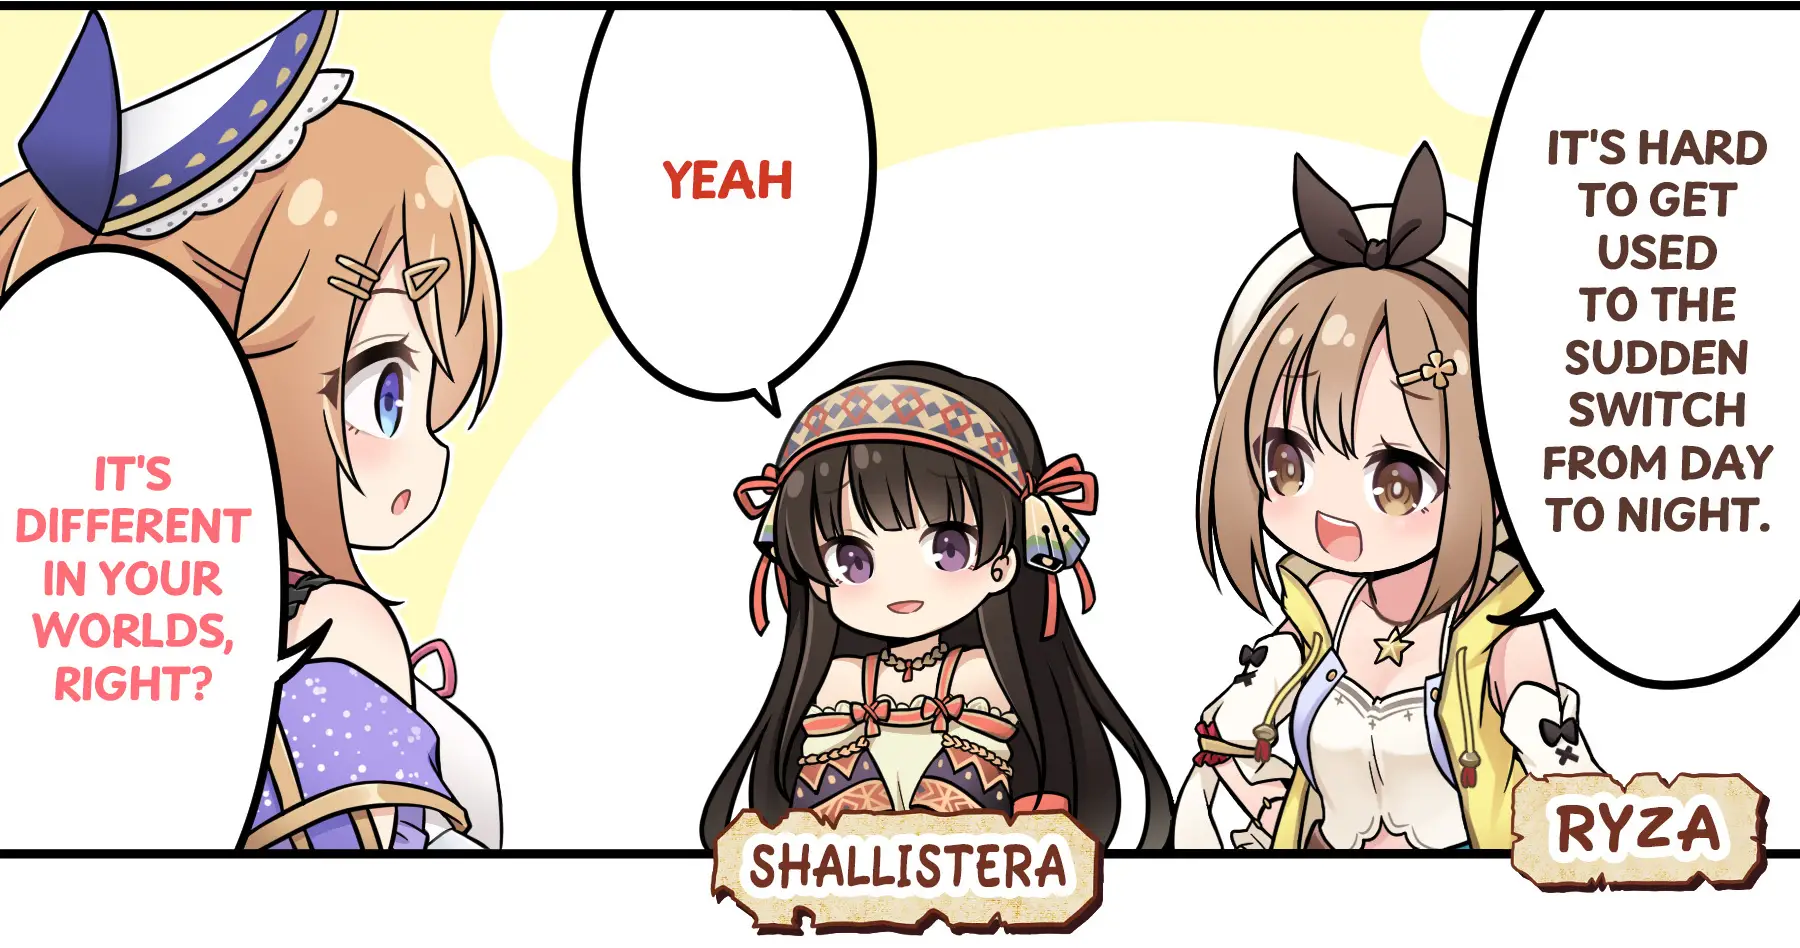 New Atelier Resleriana English Mini-Manga Discusses World Differences and Guilds